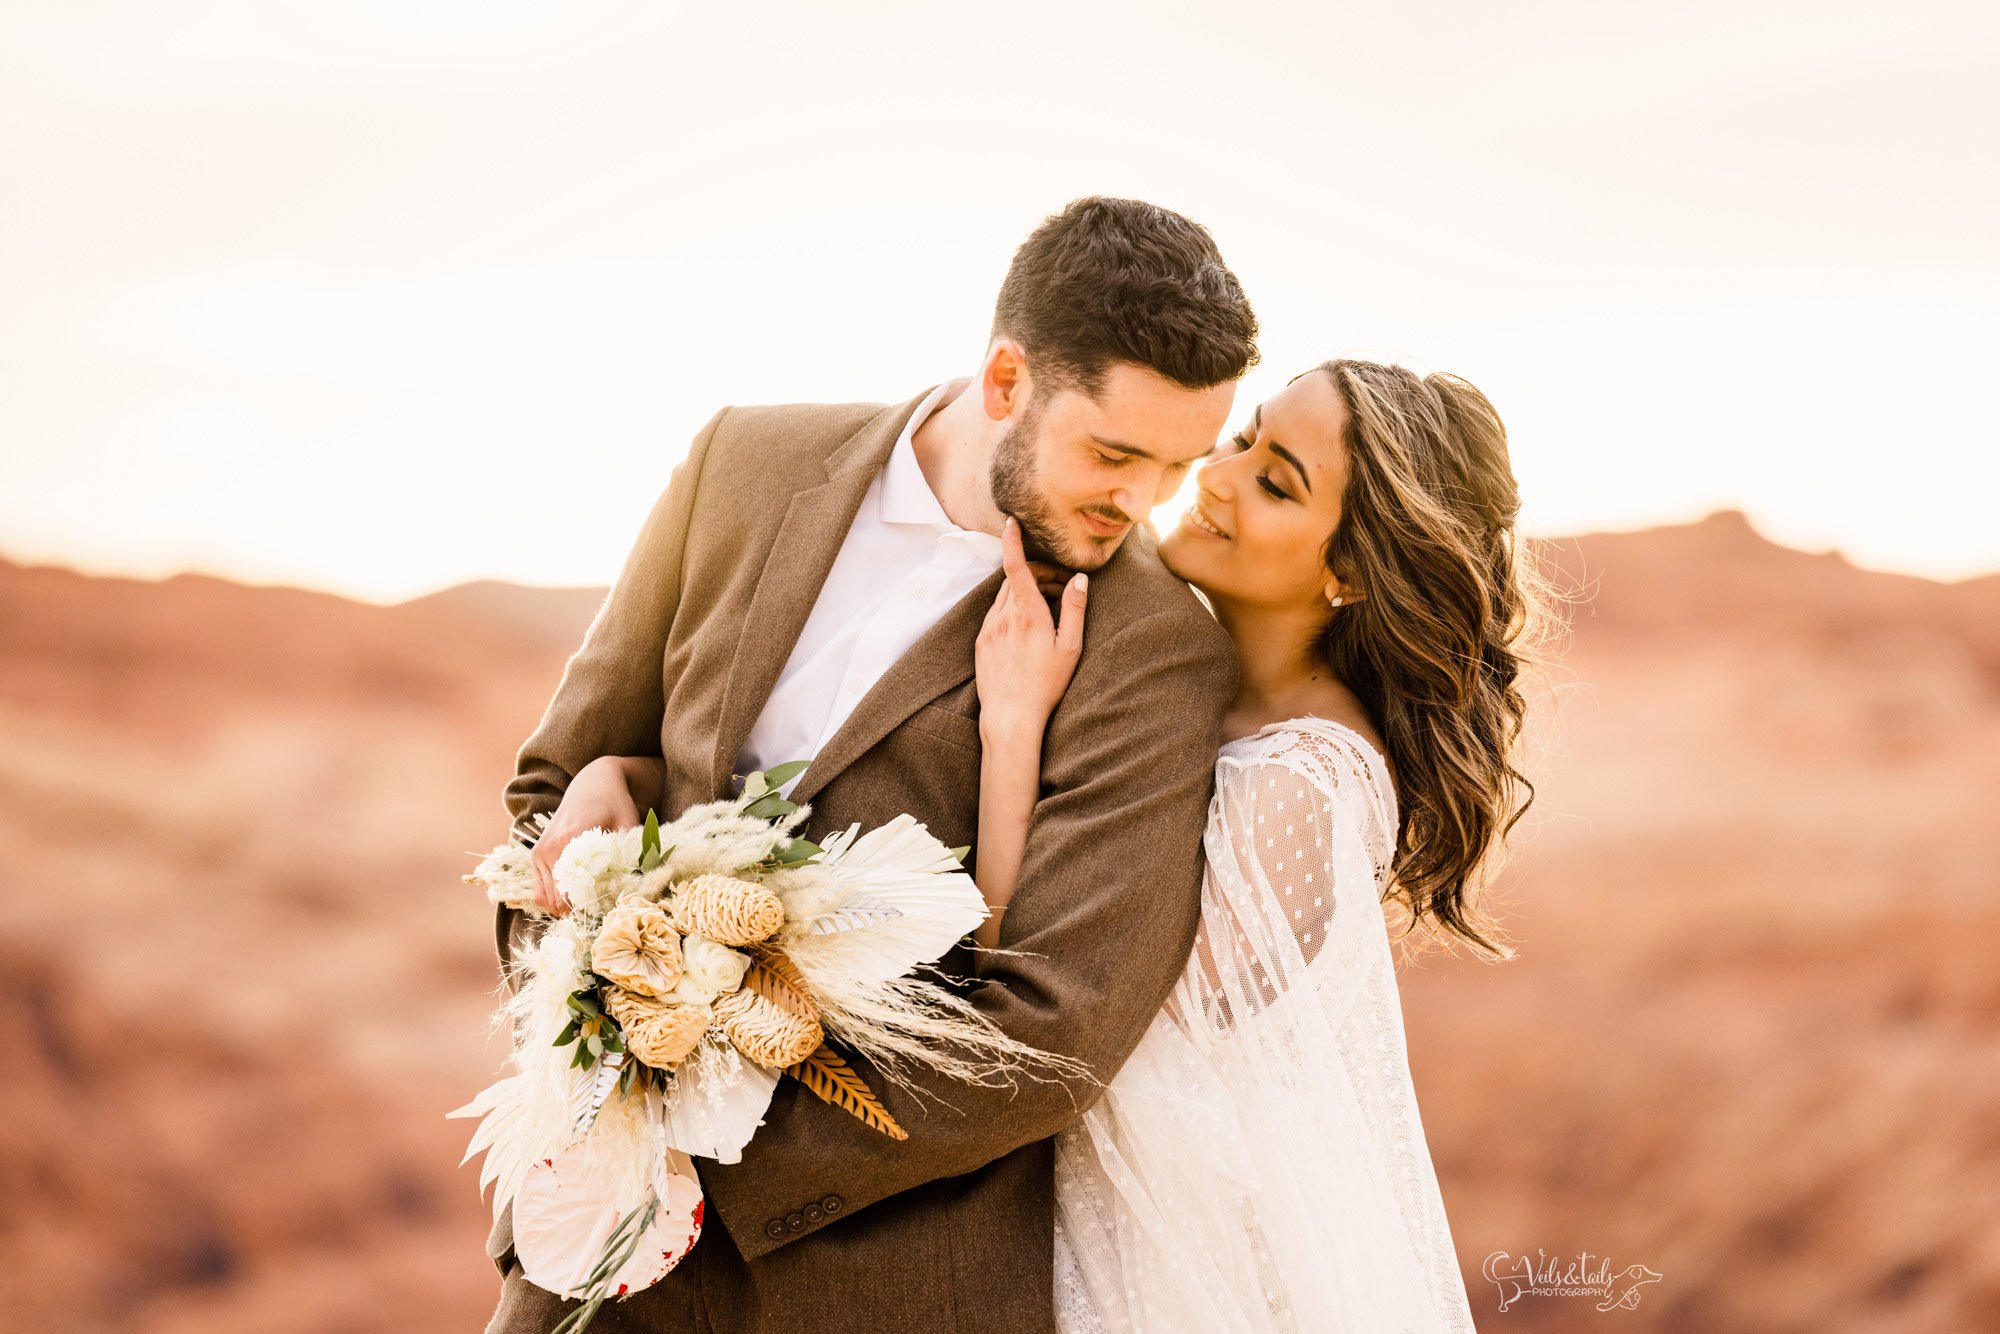 boho wedding style, colorful desert adventure elopement photography Valley of Fire, Nevada